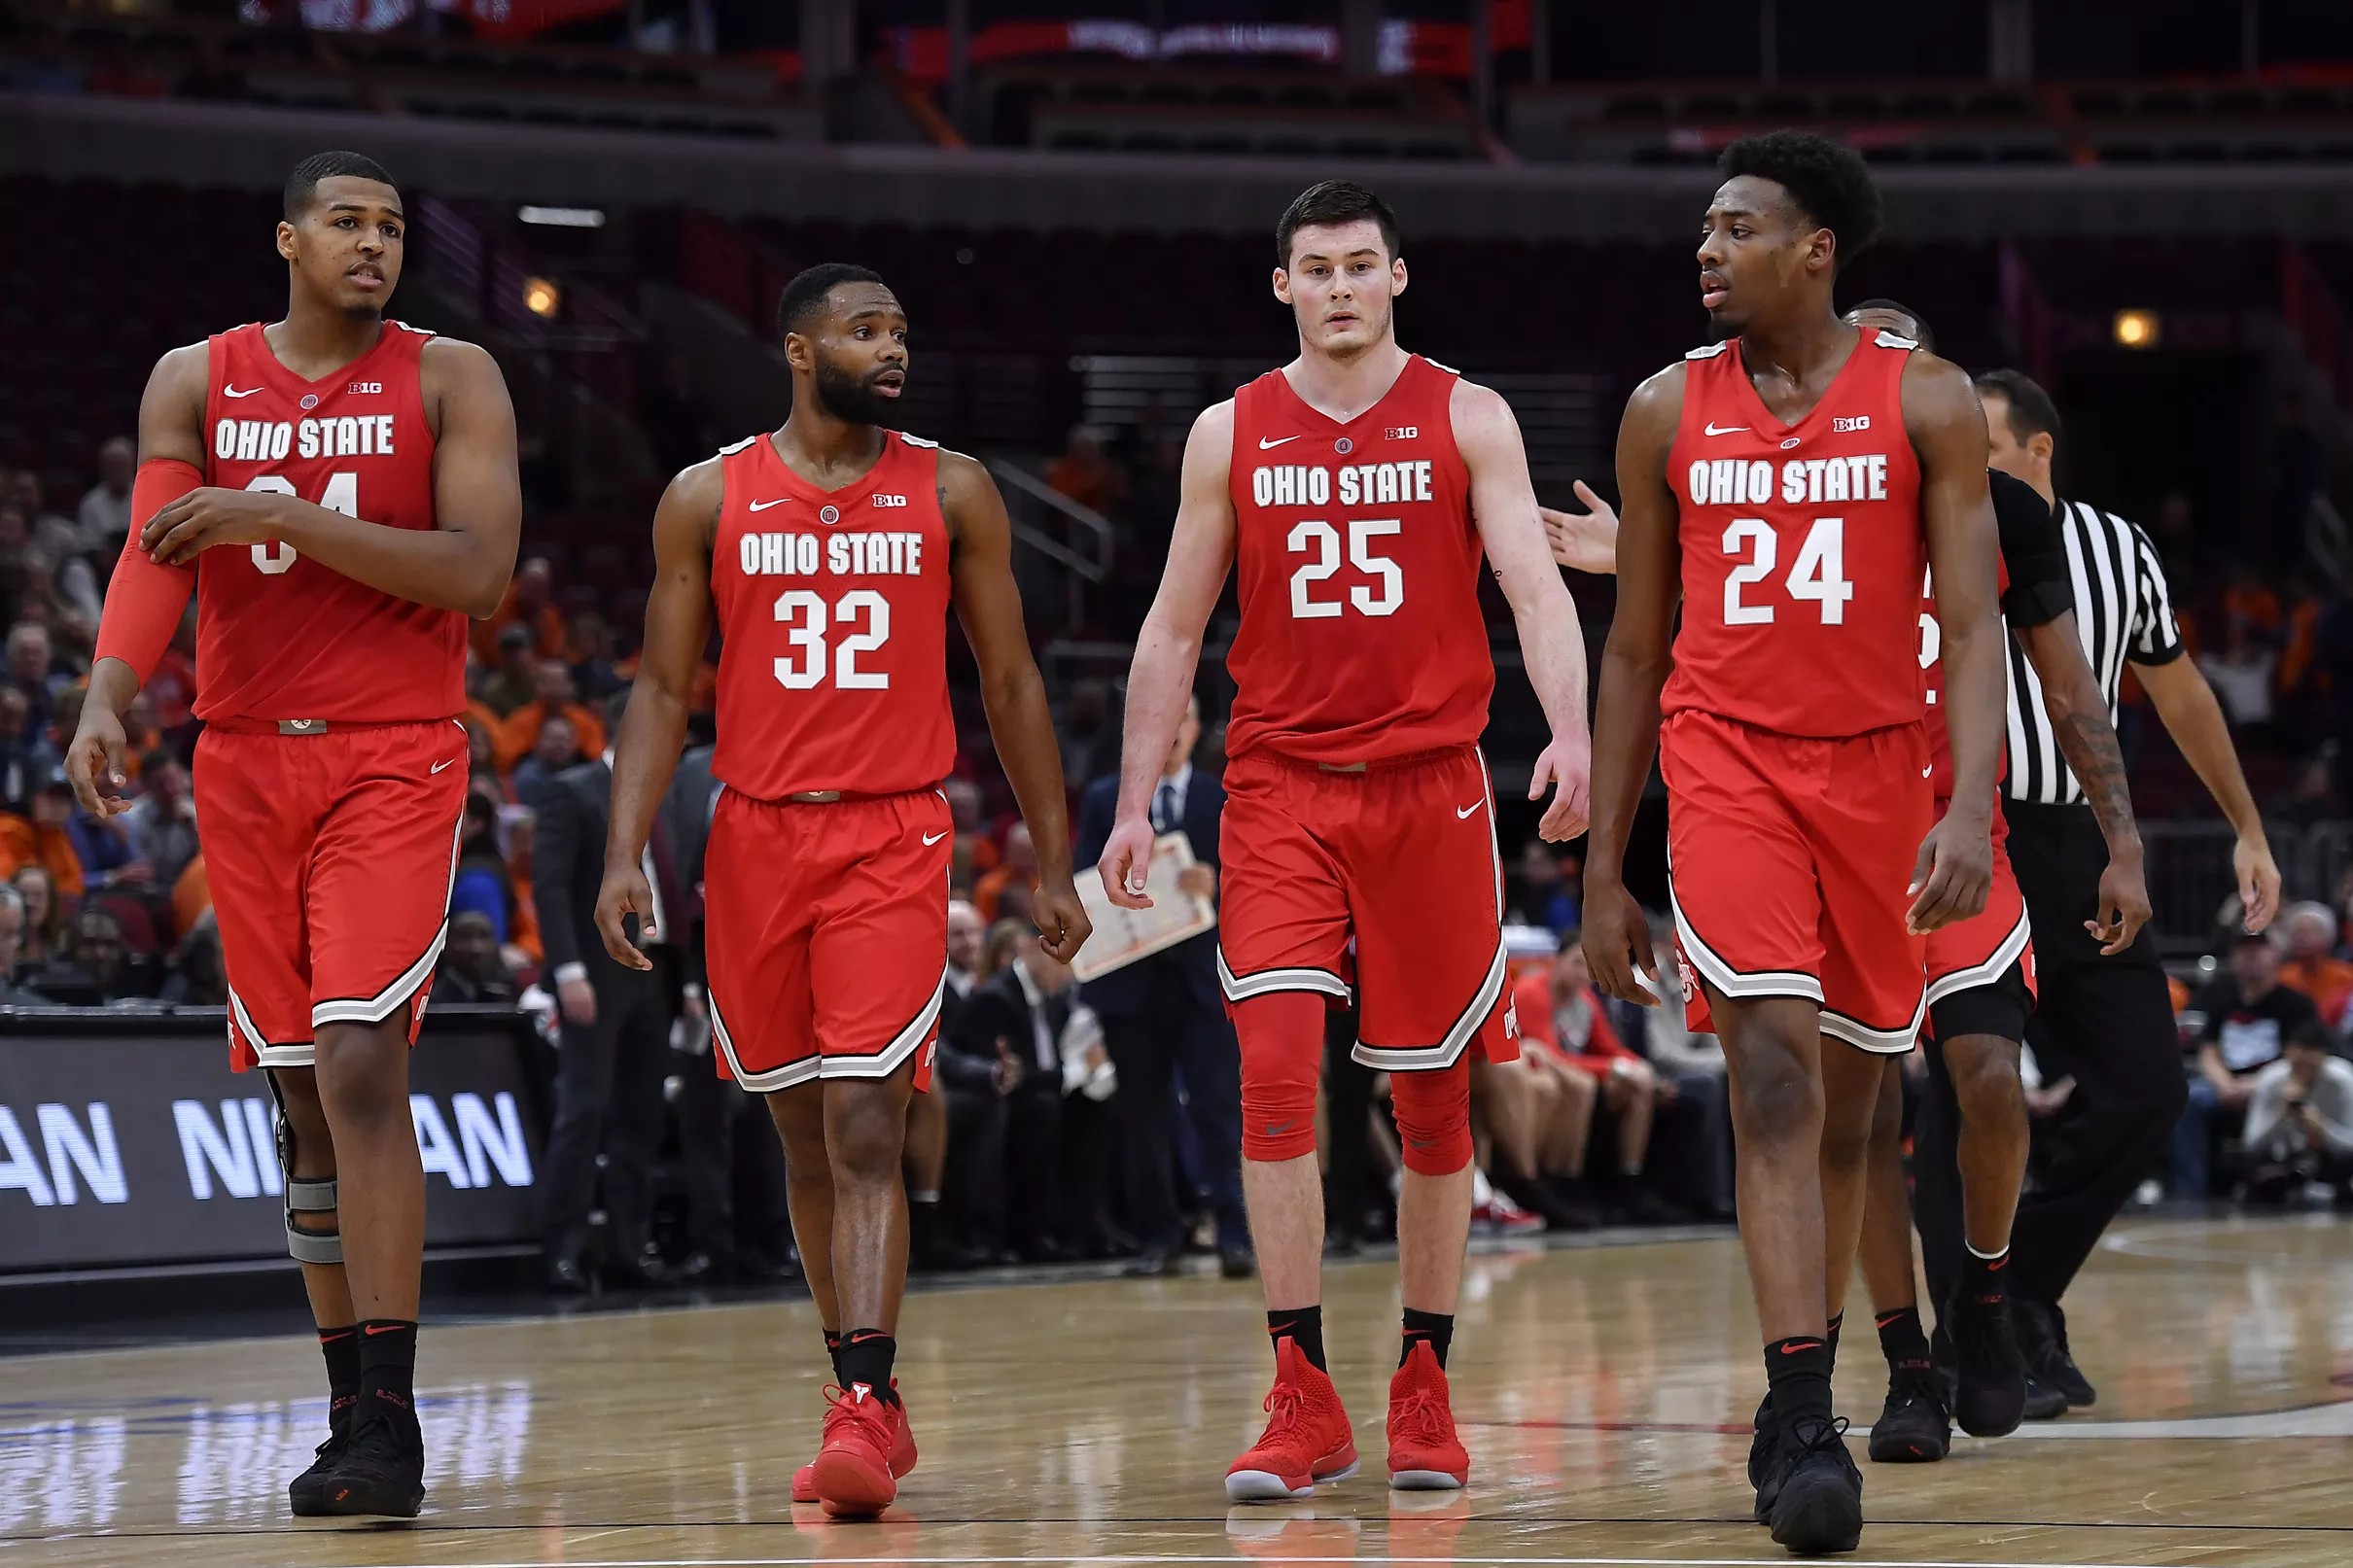 Ohio State moves up to No. 15 in AP Men’s Basketball Poll